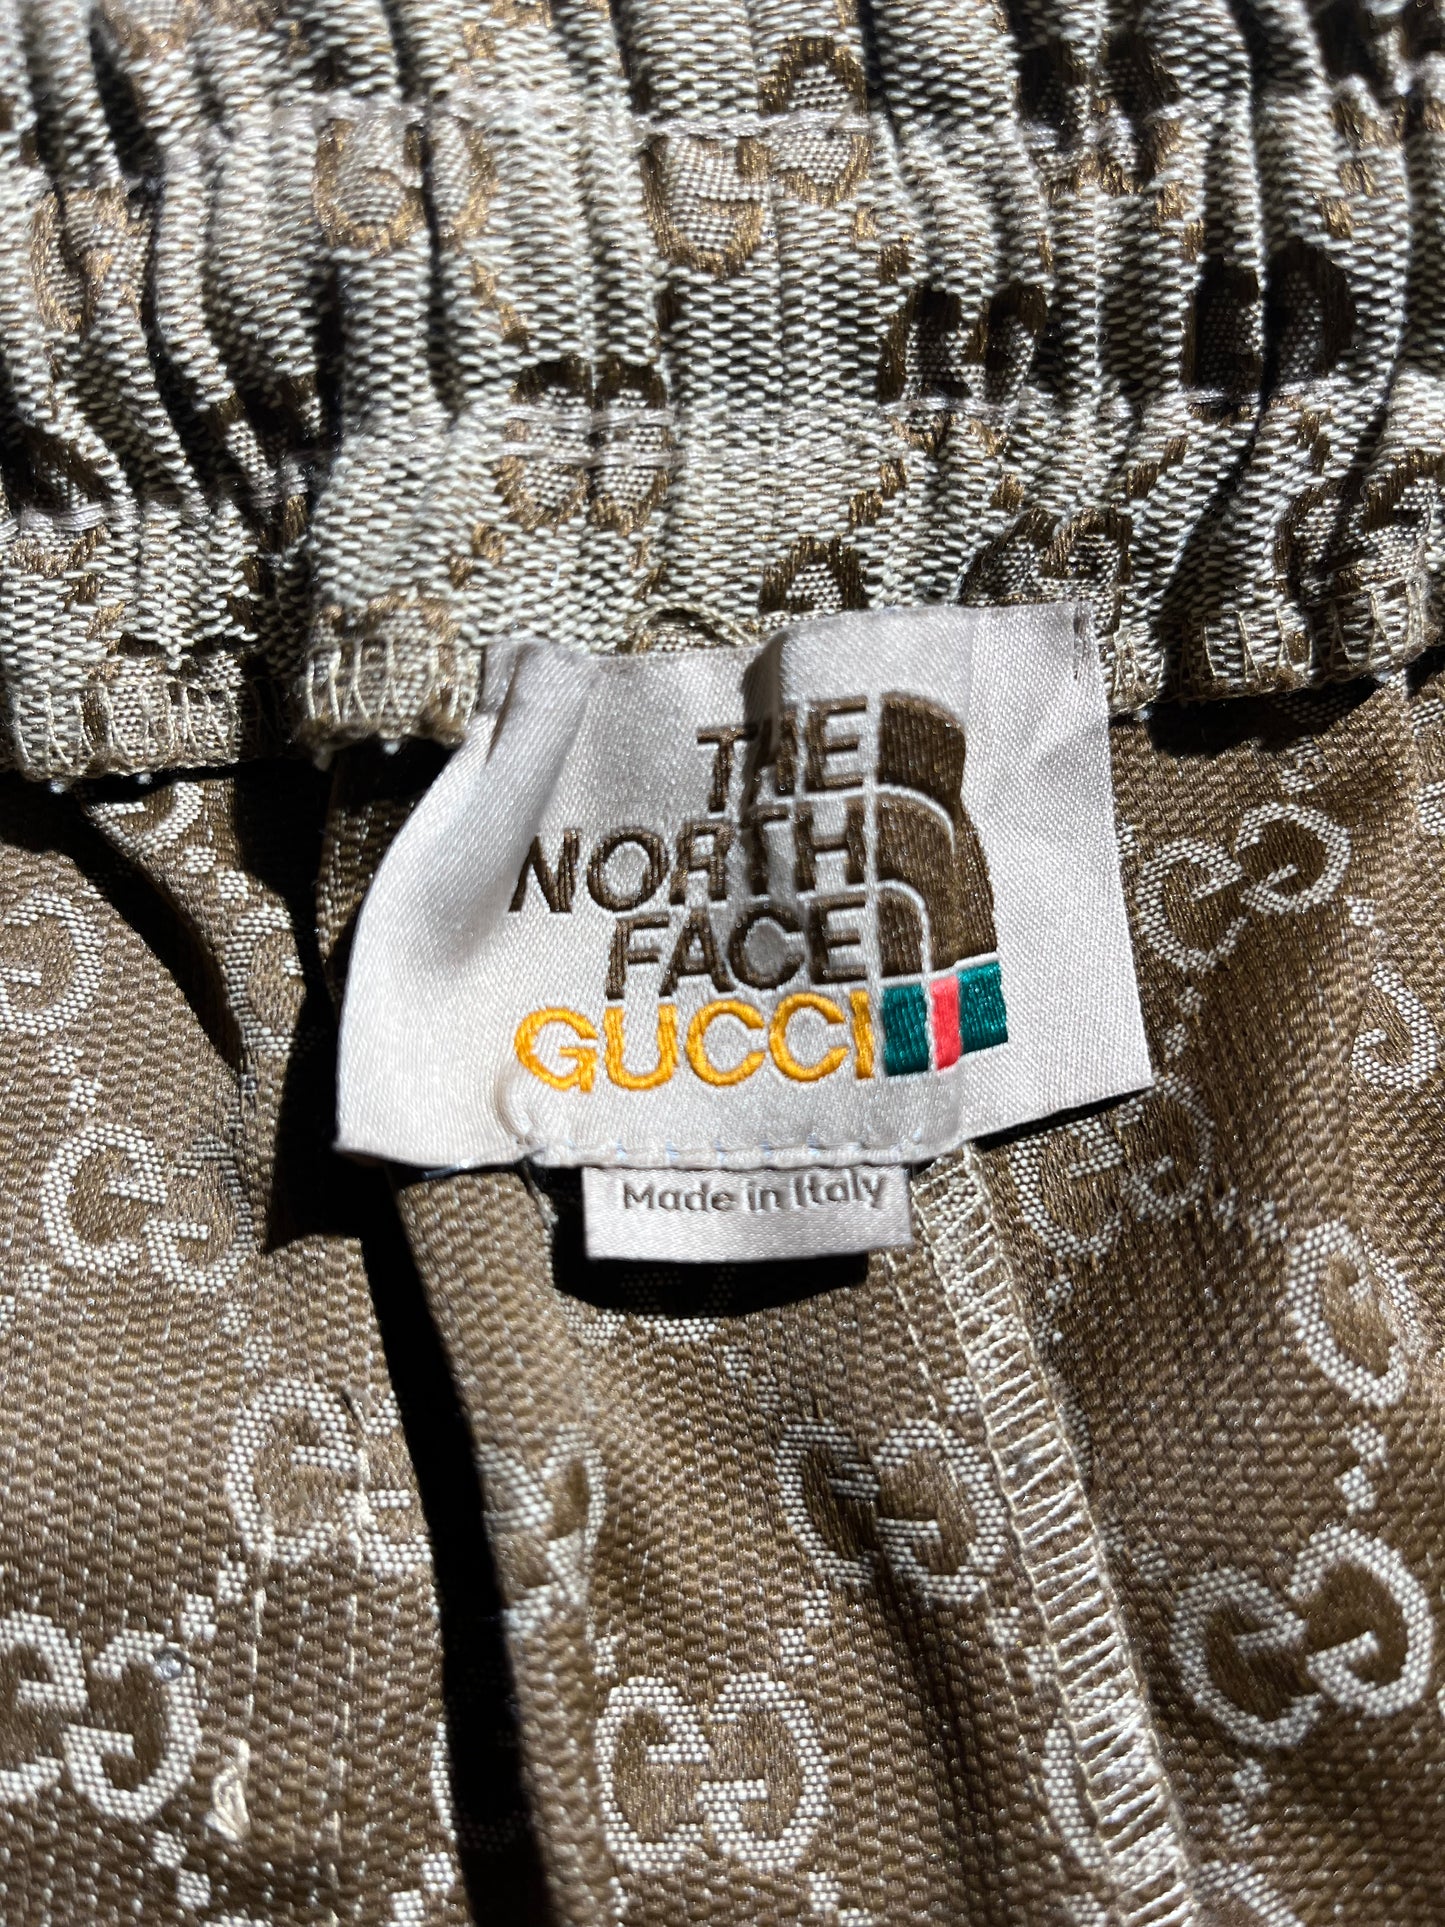 Vintage The North Face Gucci Pants Bootleg